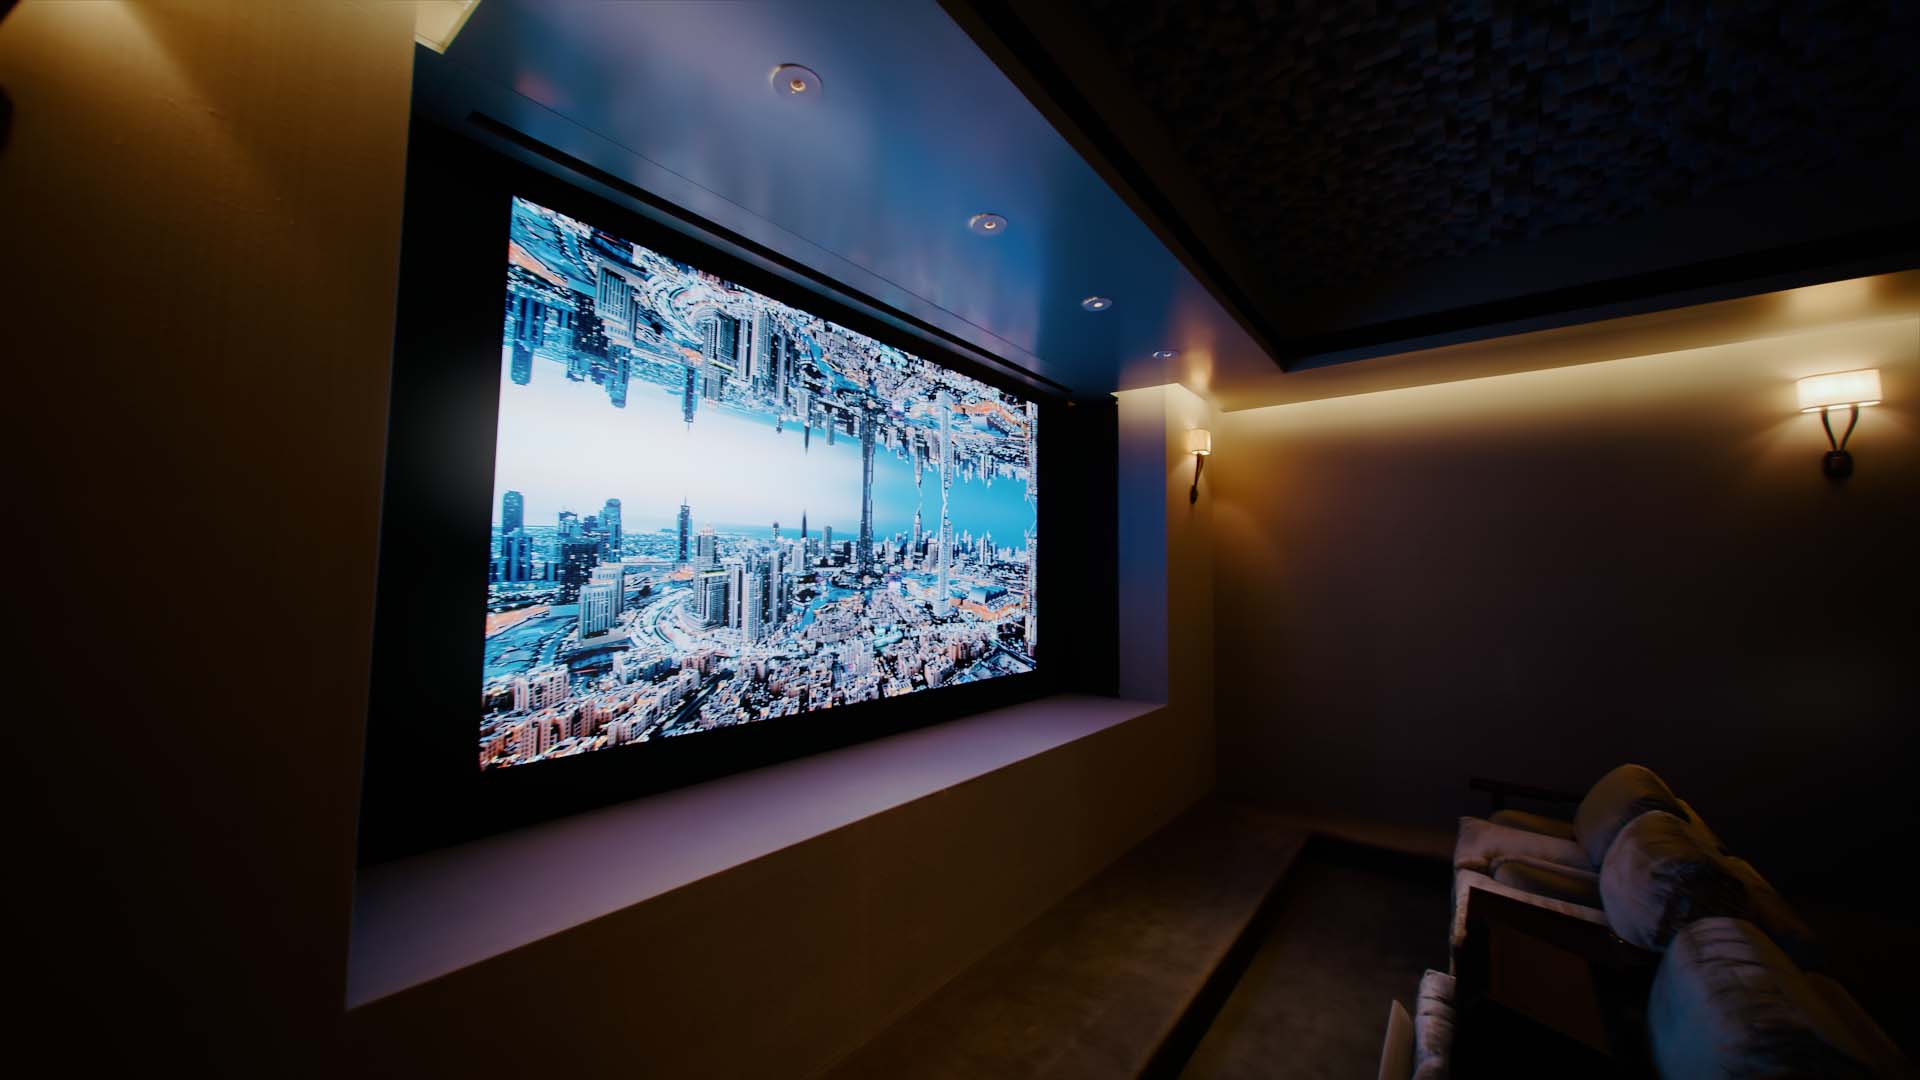 Samsung The Wall Micro-LED TV in a dark home theater